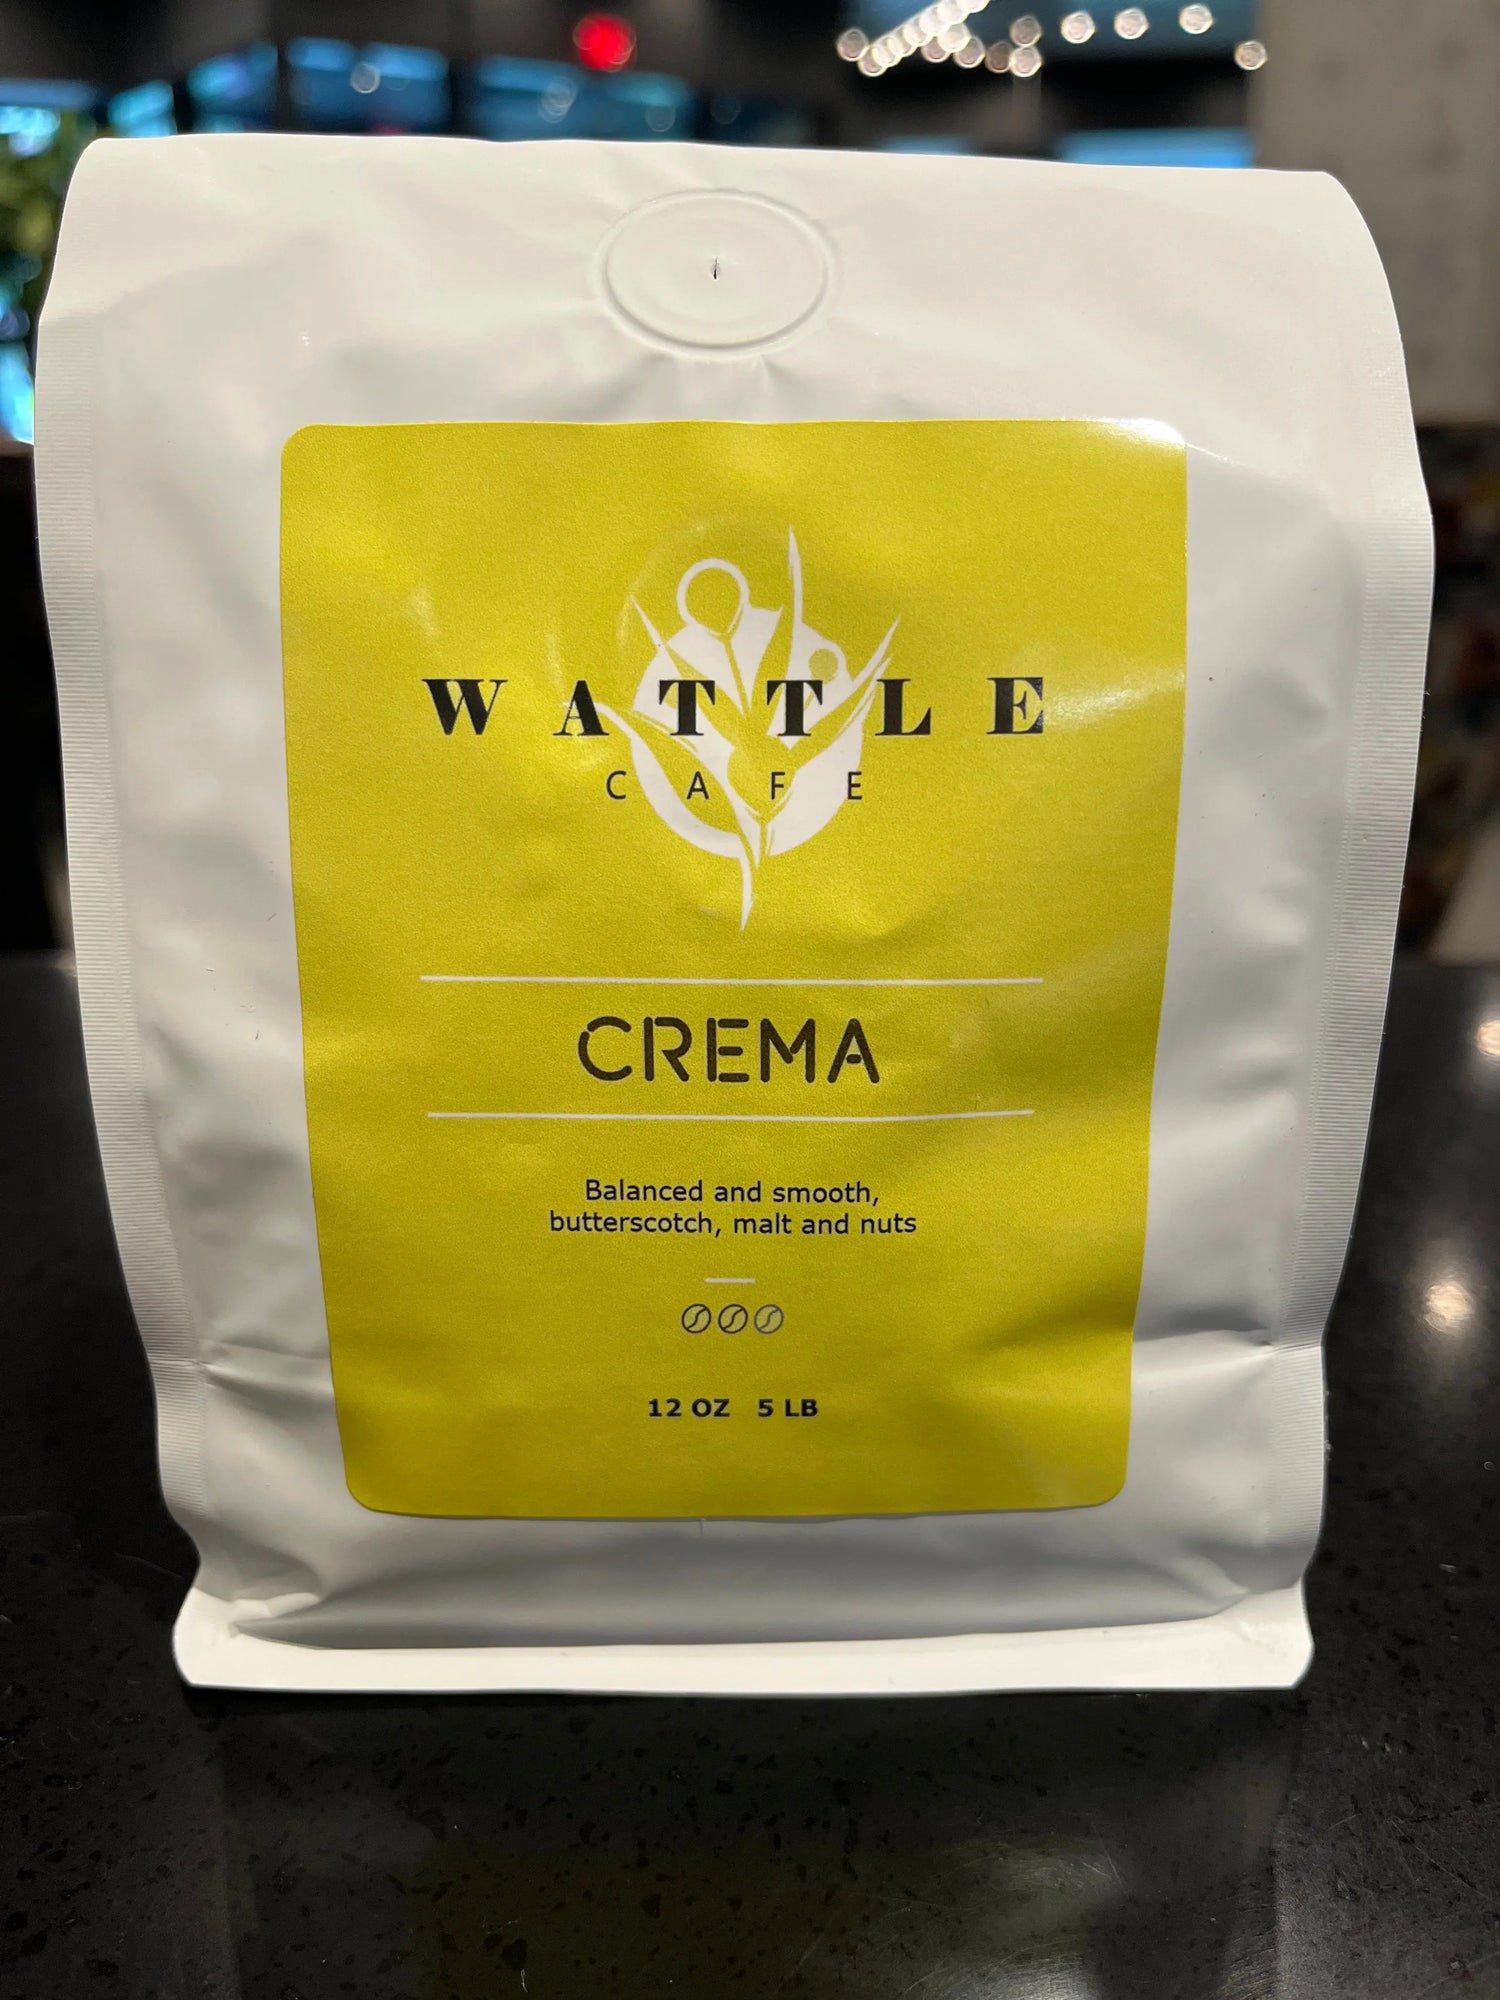 Wattle Cafe retail coffee bag front